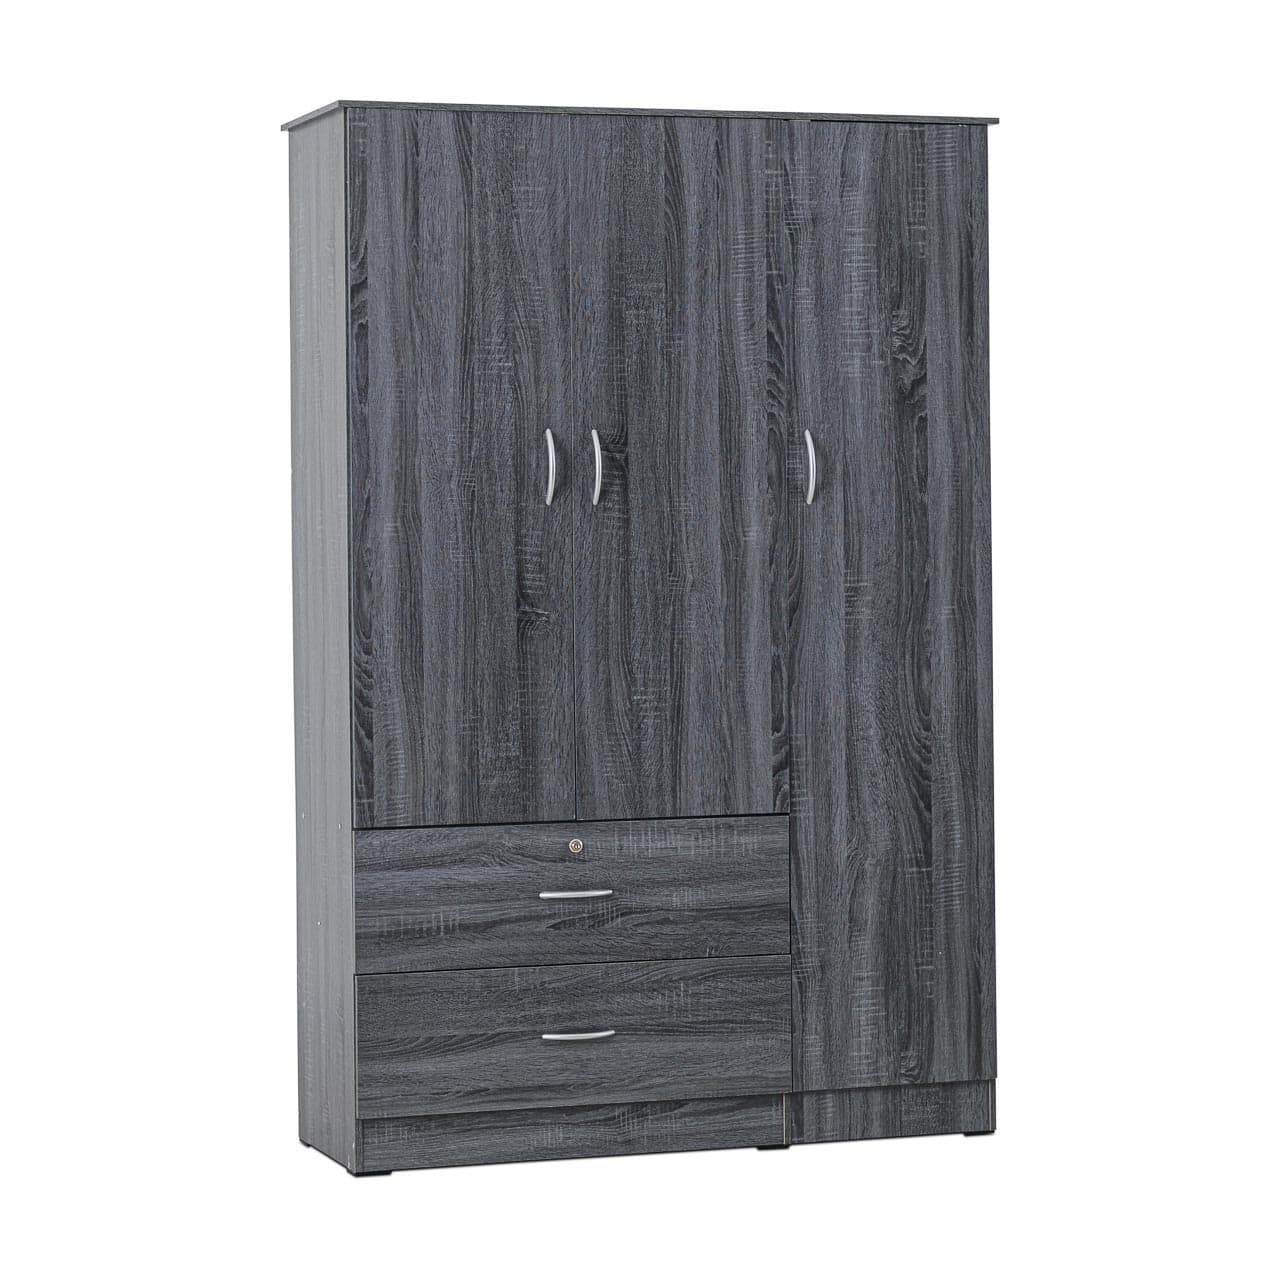 3 Door Wardrobe - Available in 2 Colours - Greywood 4